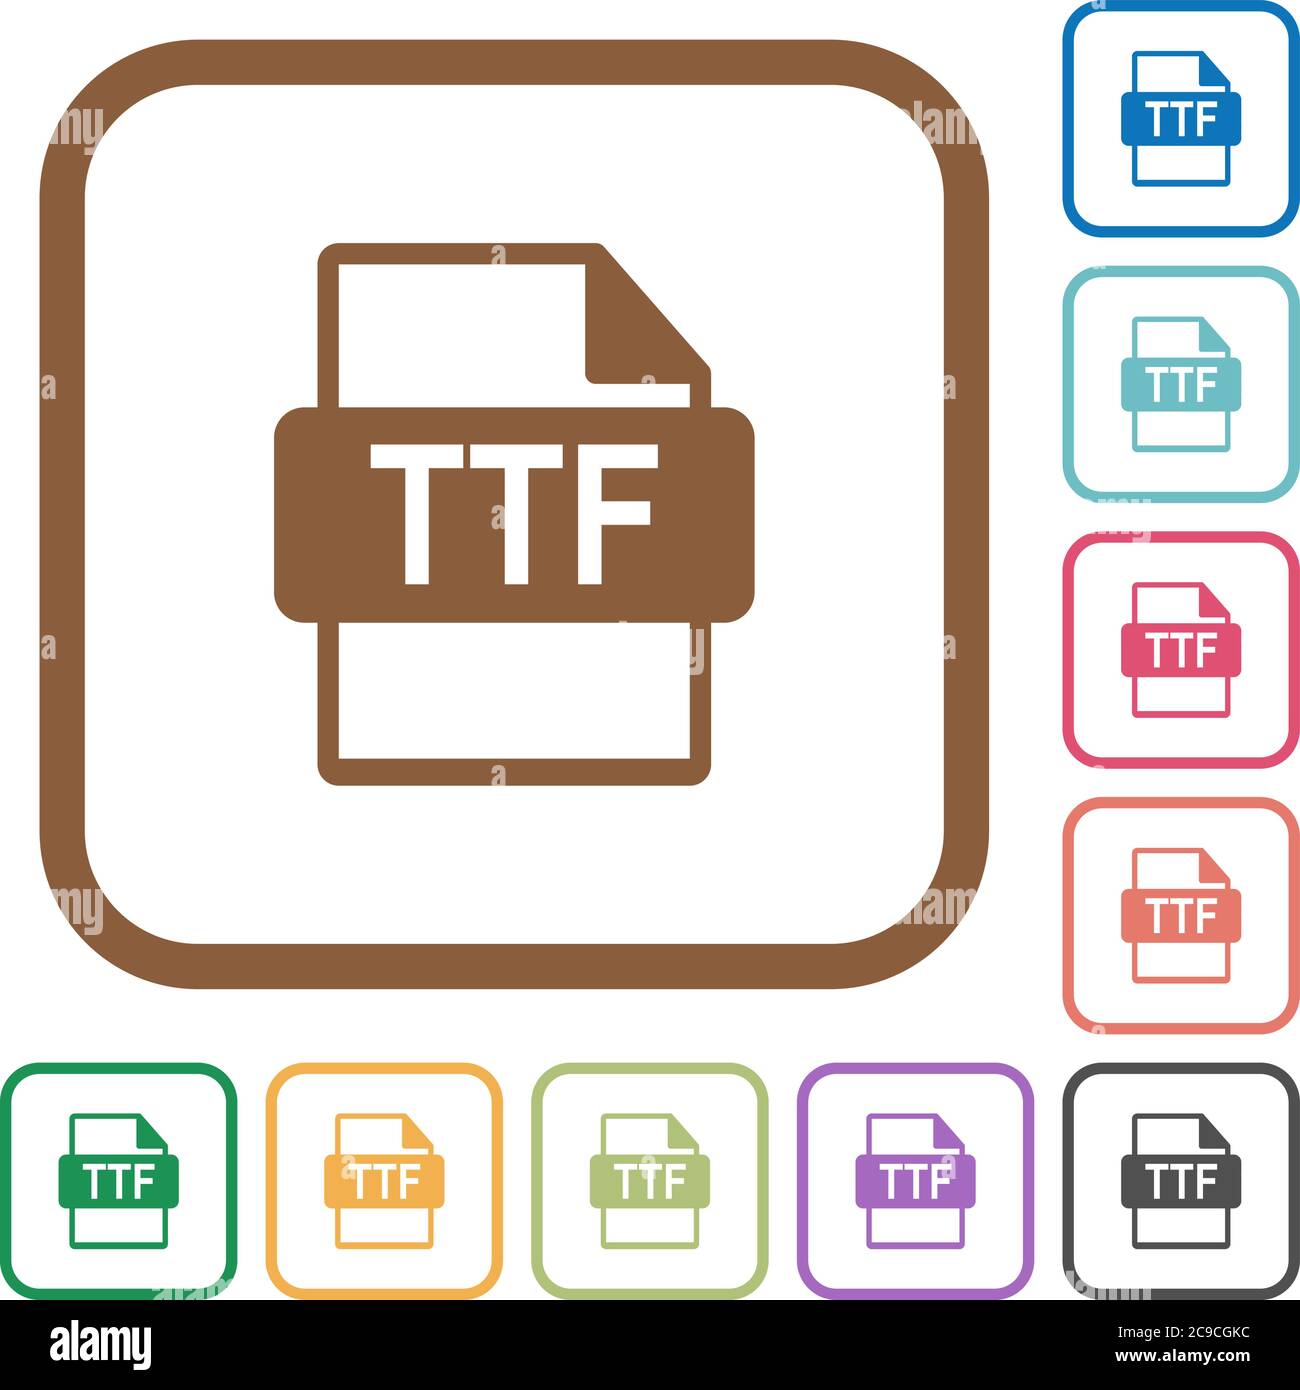 TTF file format simple icons in color rounded square frames on white background Stock Vector